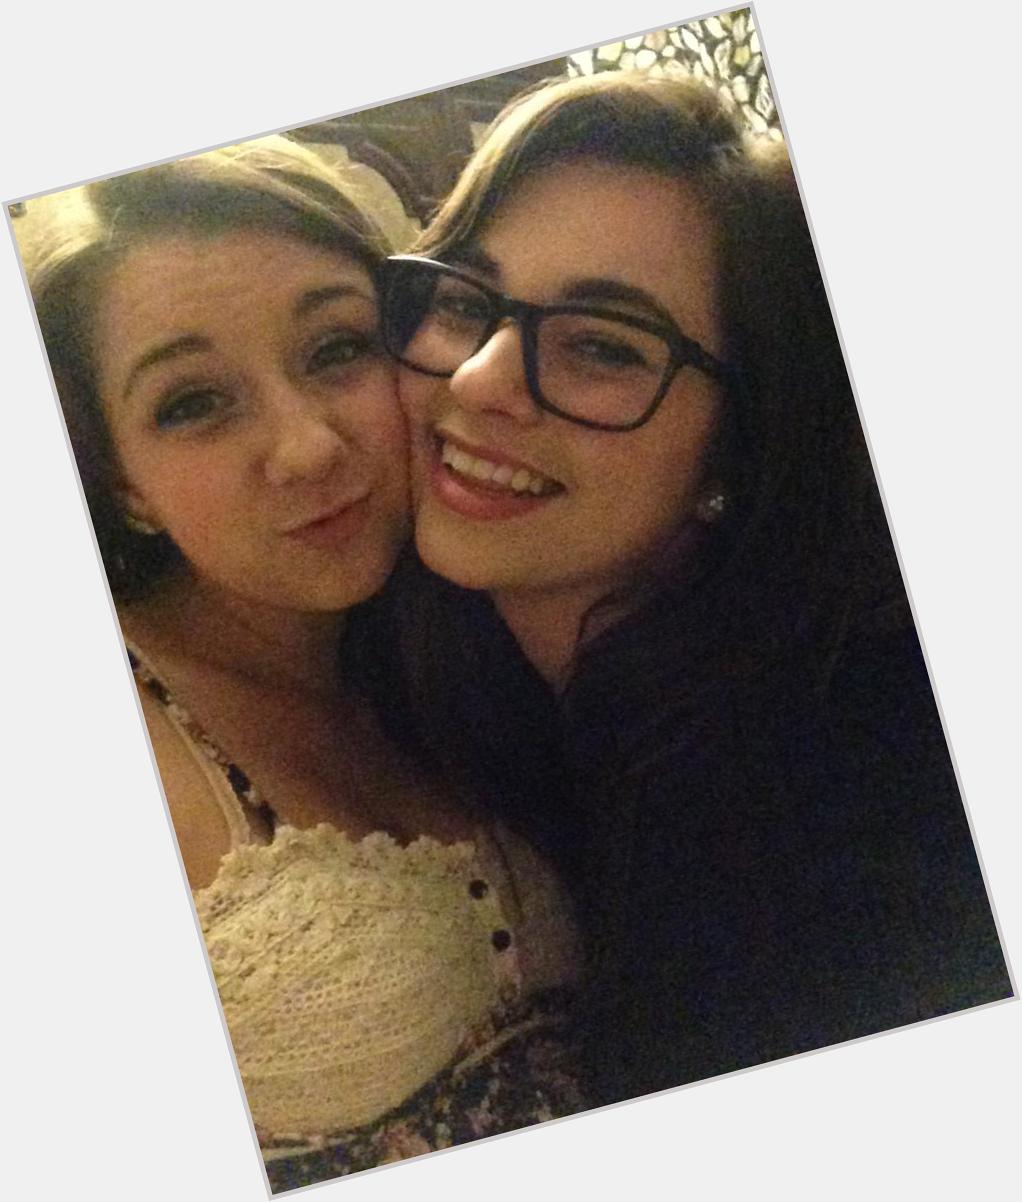 HAPPY BIRTHDAY TO THIS BEAUTIFUL GAL WHO IM LUCKY ENOUGH TO CALL MY BEST FRIEND I LOVE YOU SO MUCH   